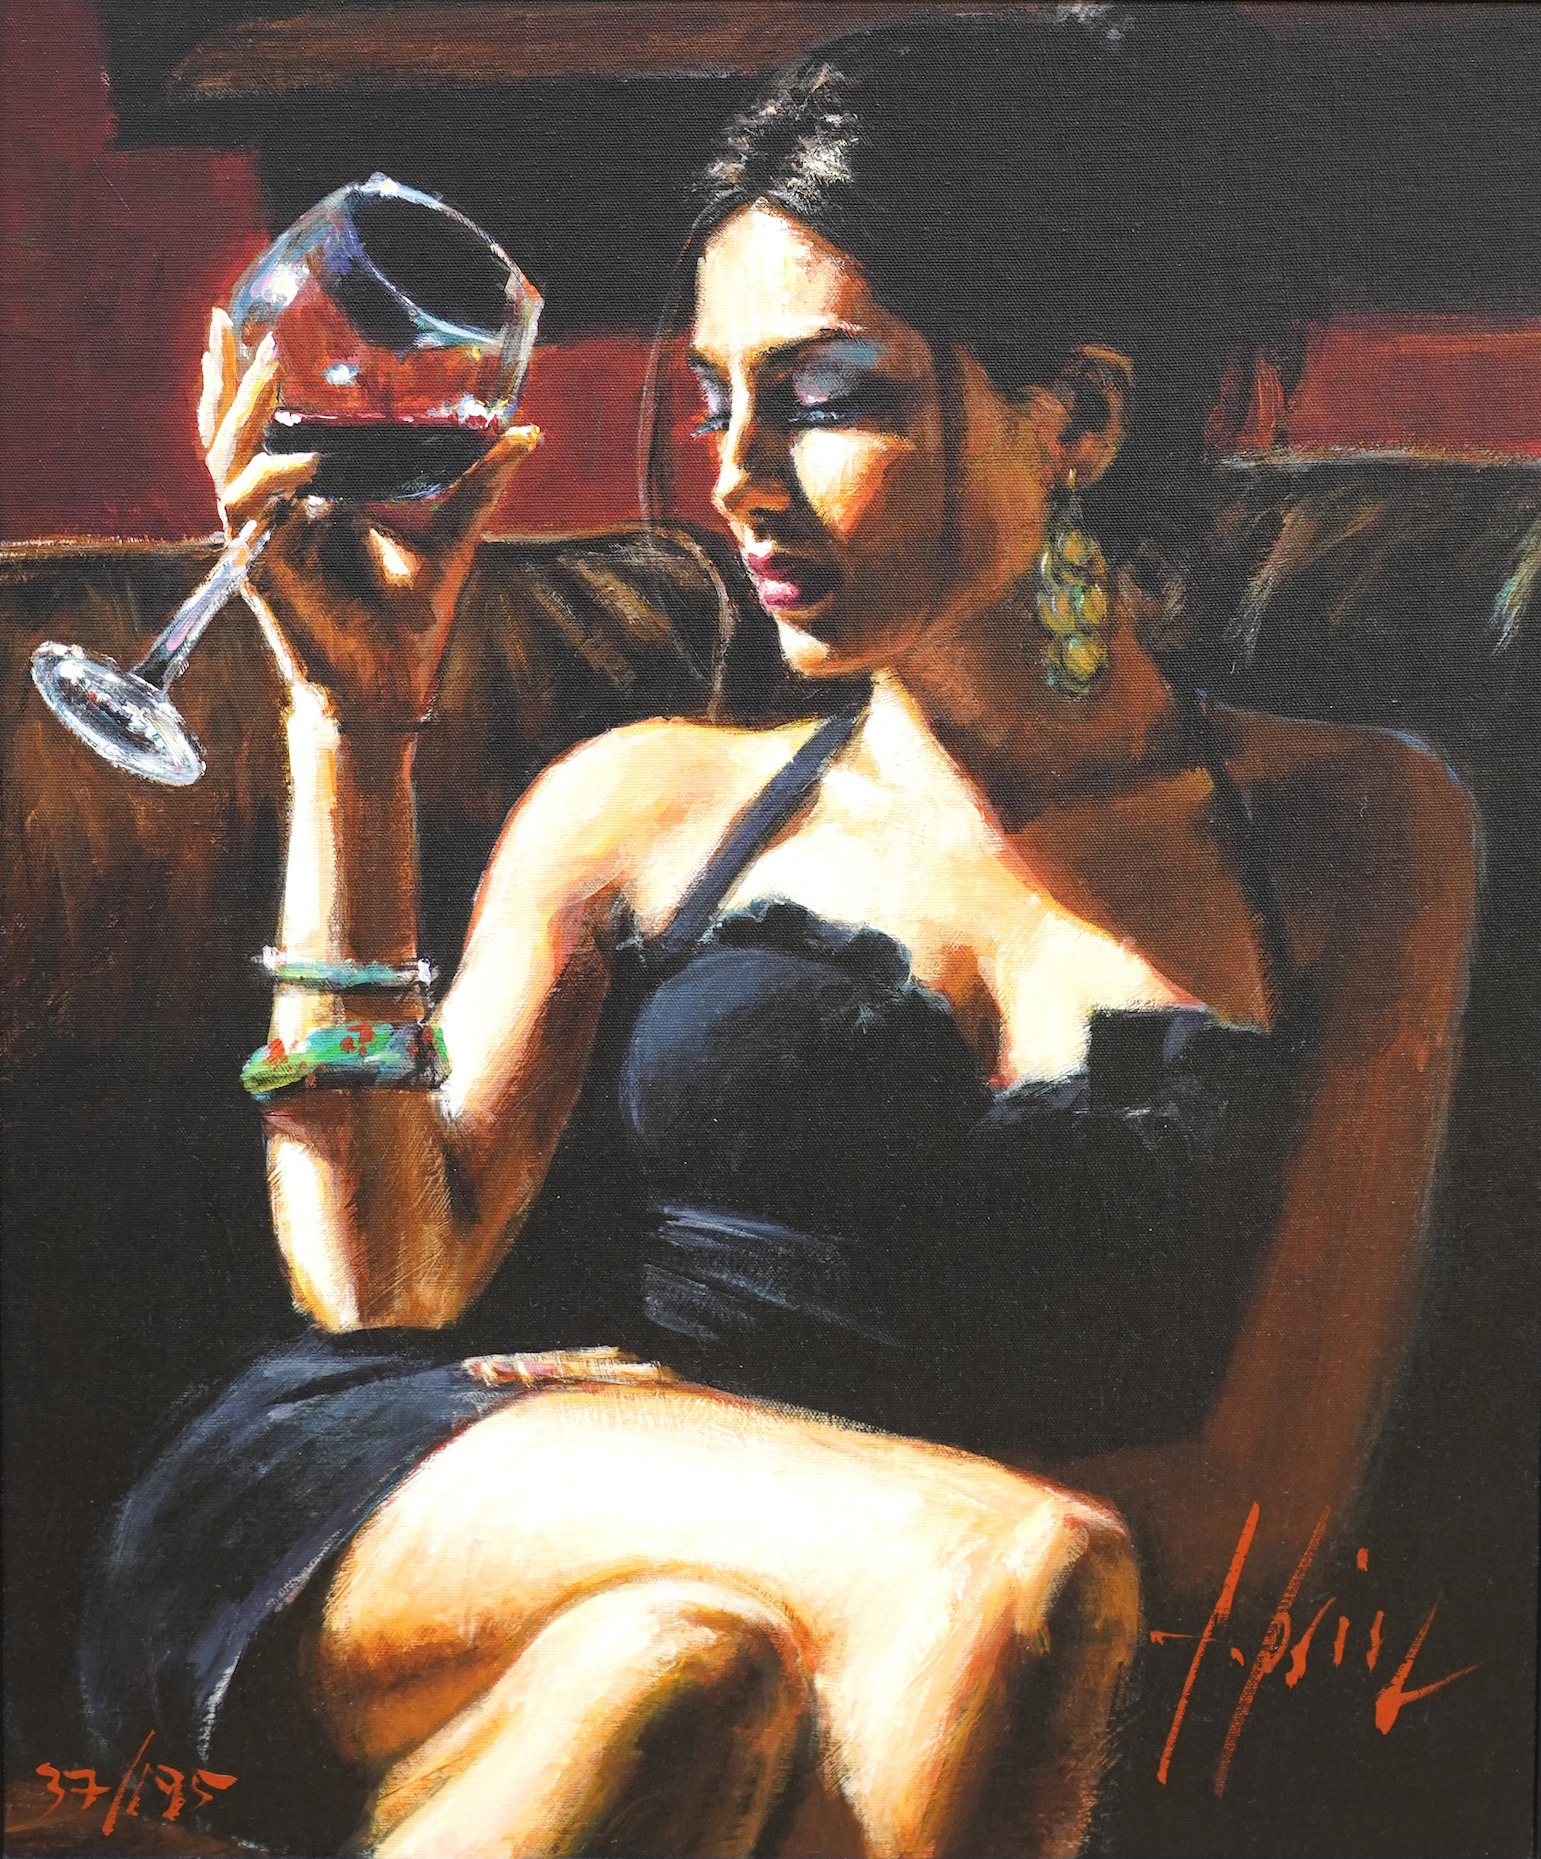 Fabian Perez (Argentine, b.1967), hand embellished giclée print on canvas, 'Tess IV' limited edition 37/195, certificate of authenticity verso, 59 x 49cm